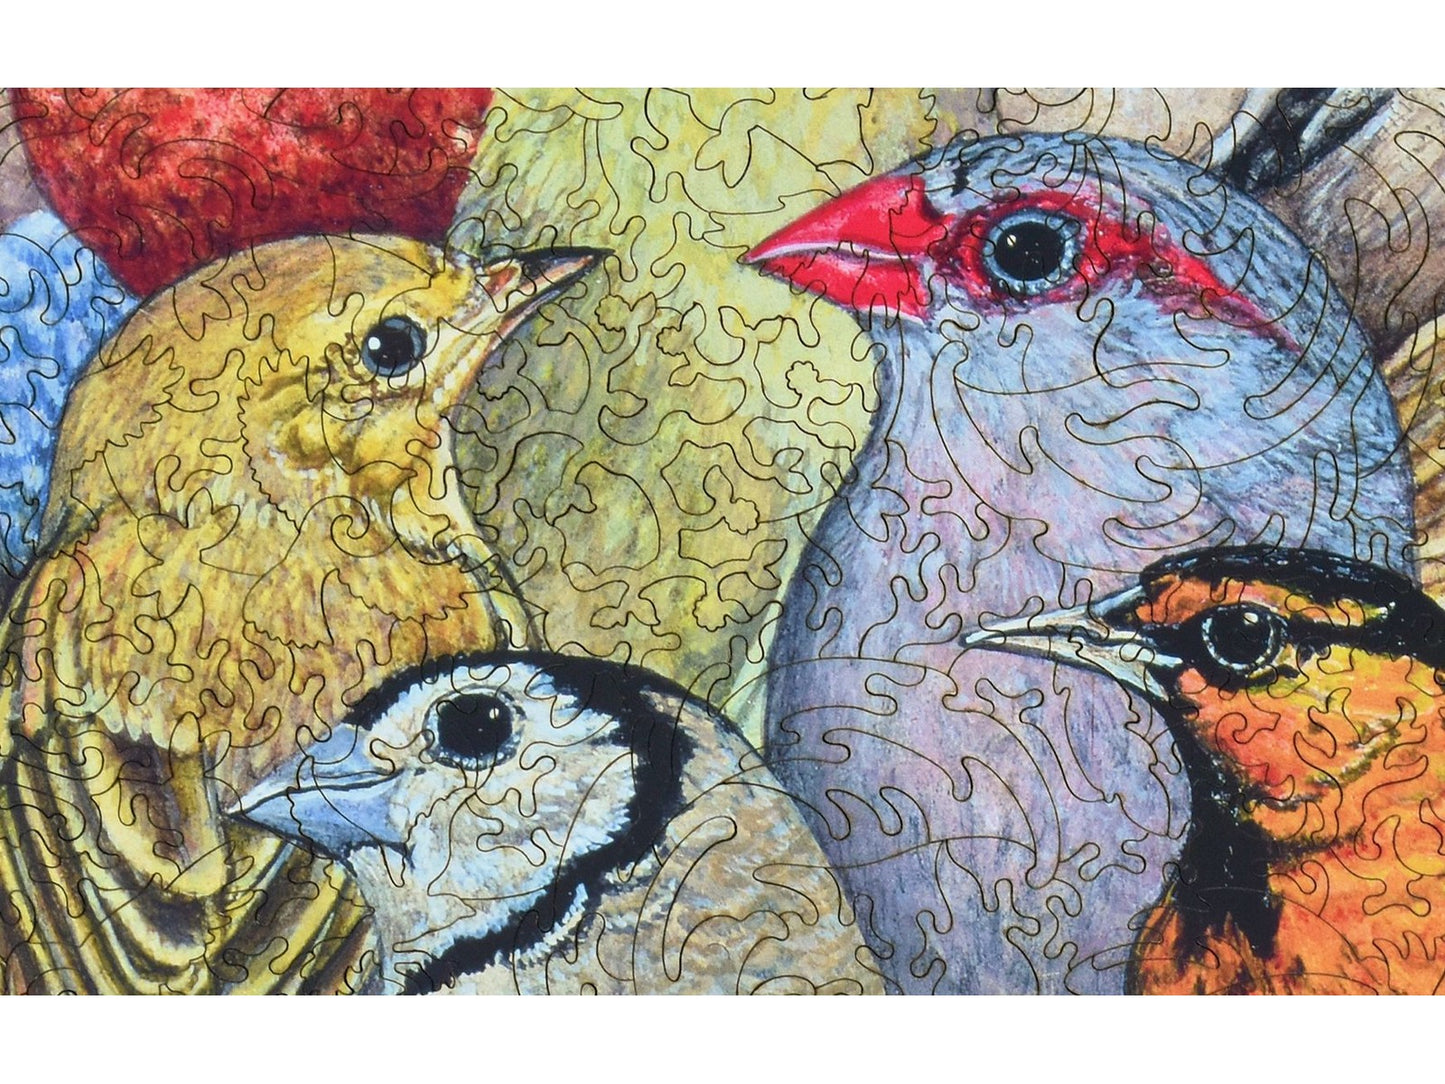 A closeup of the front of the puzzle, Patchwork Birds, showing the detail in the pieces.